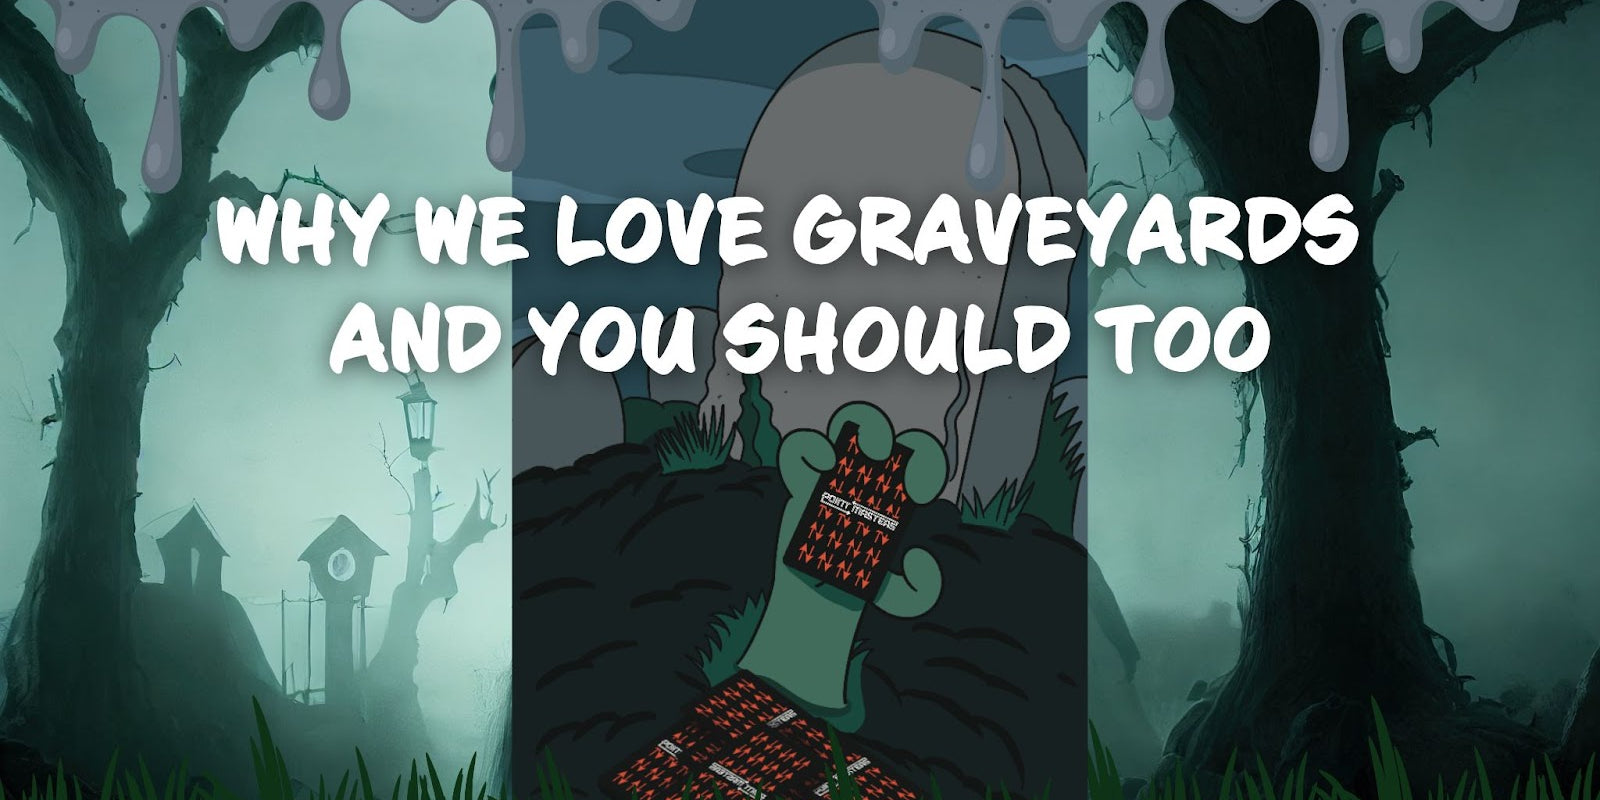 Why We Love Graveyards and You Should Too